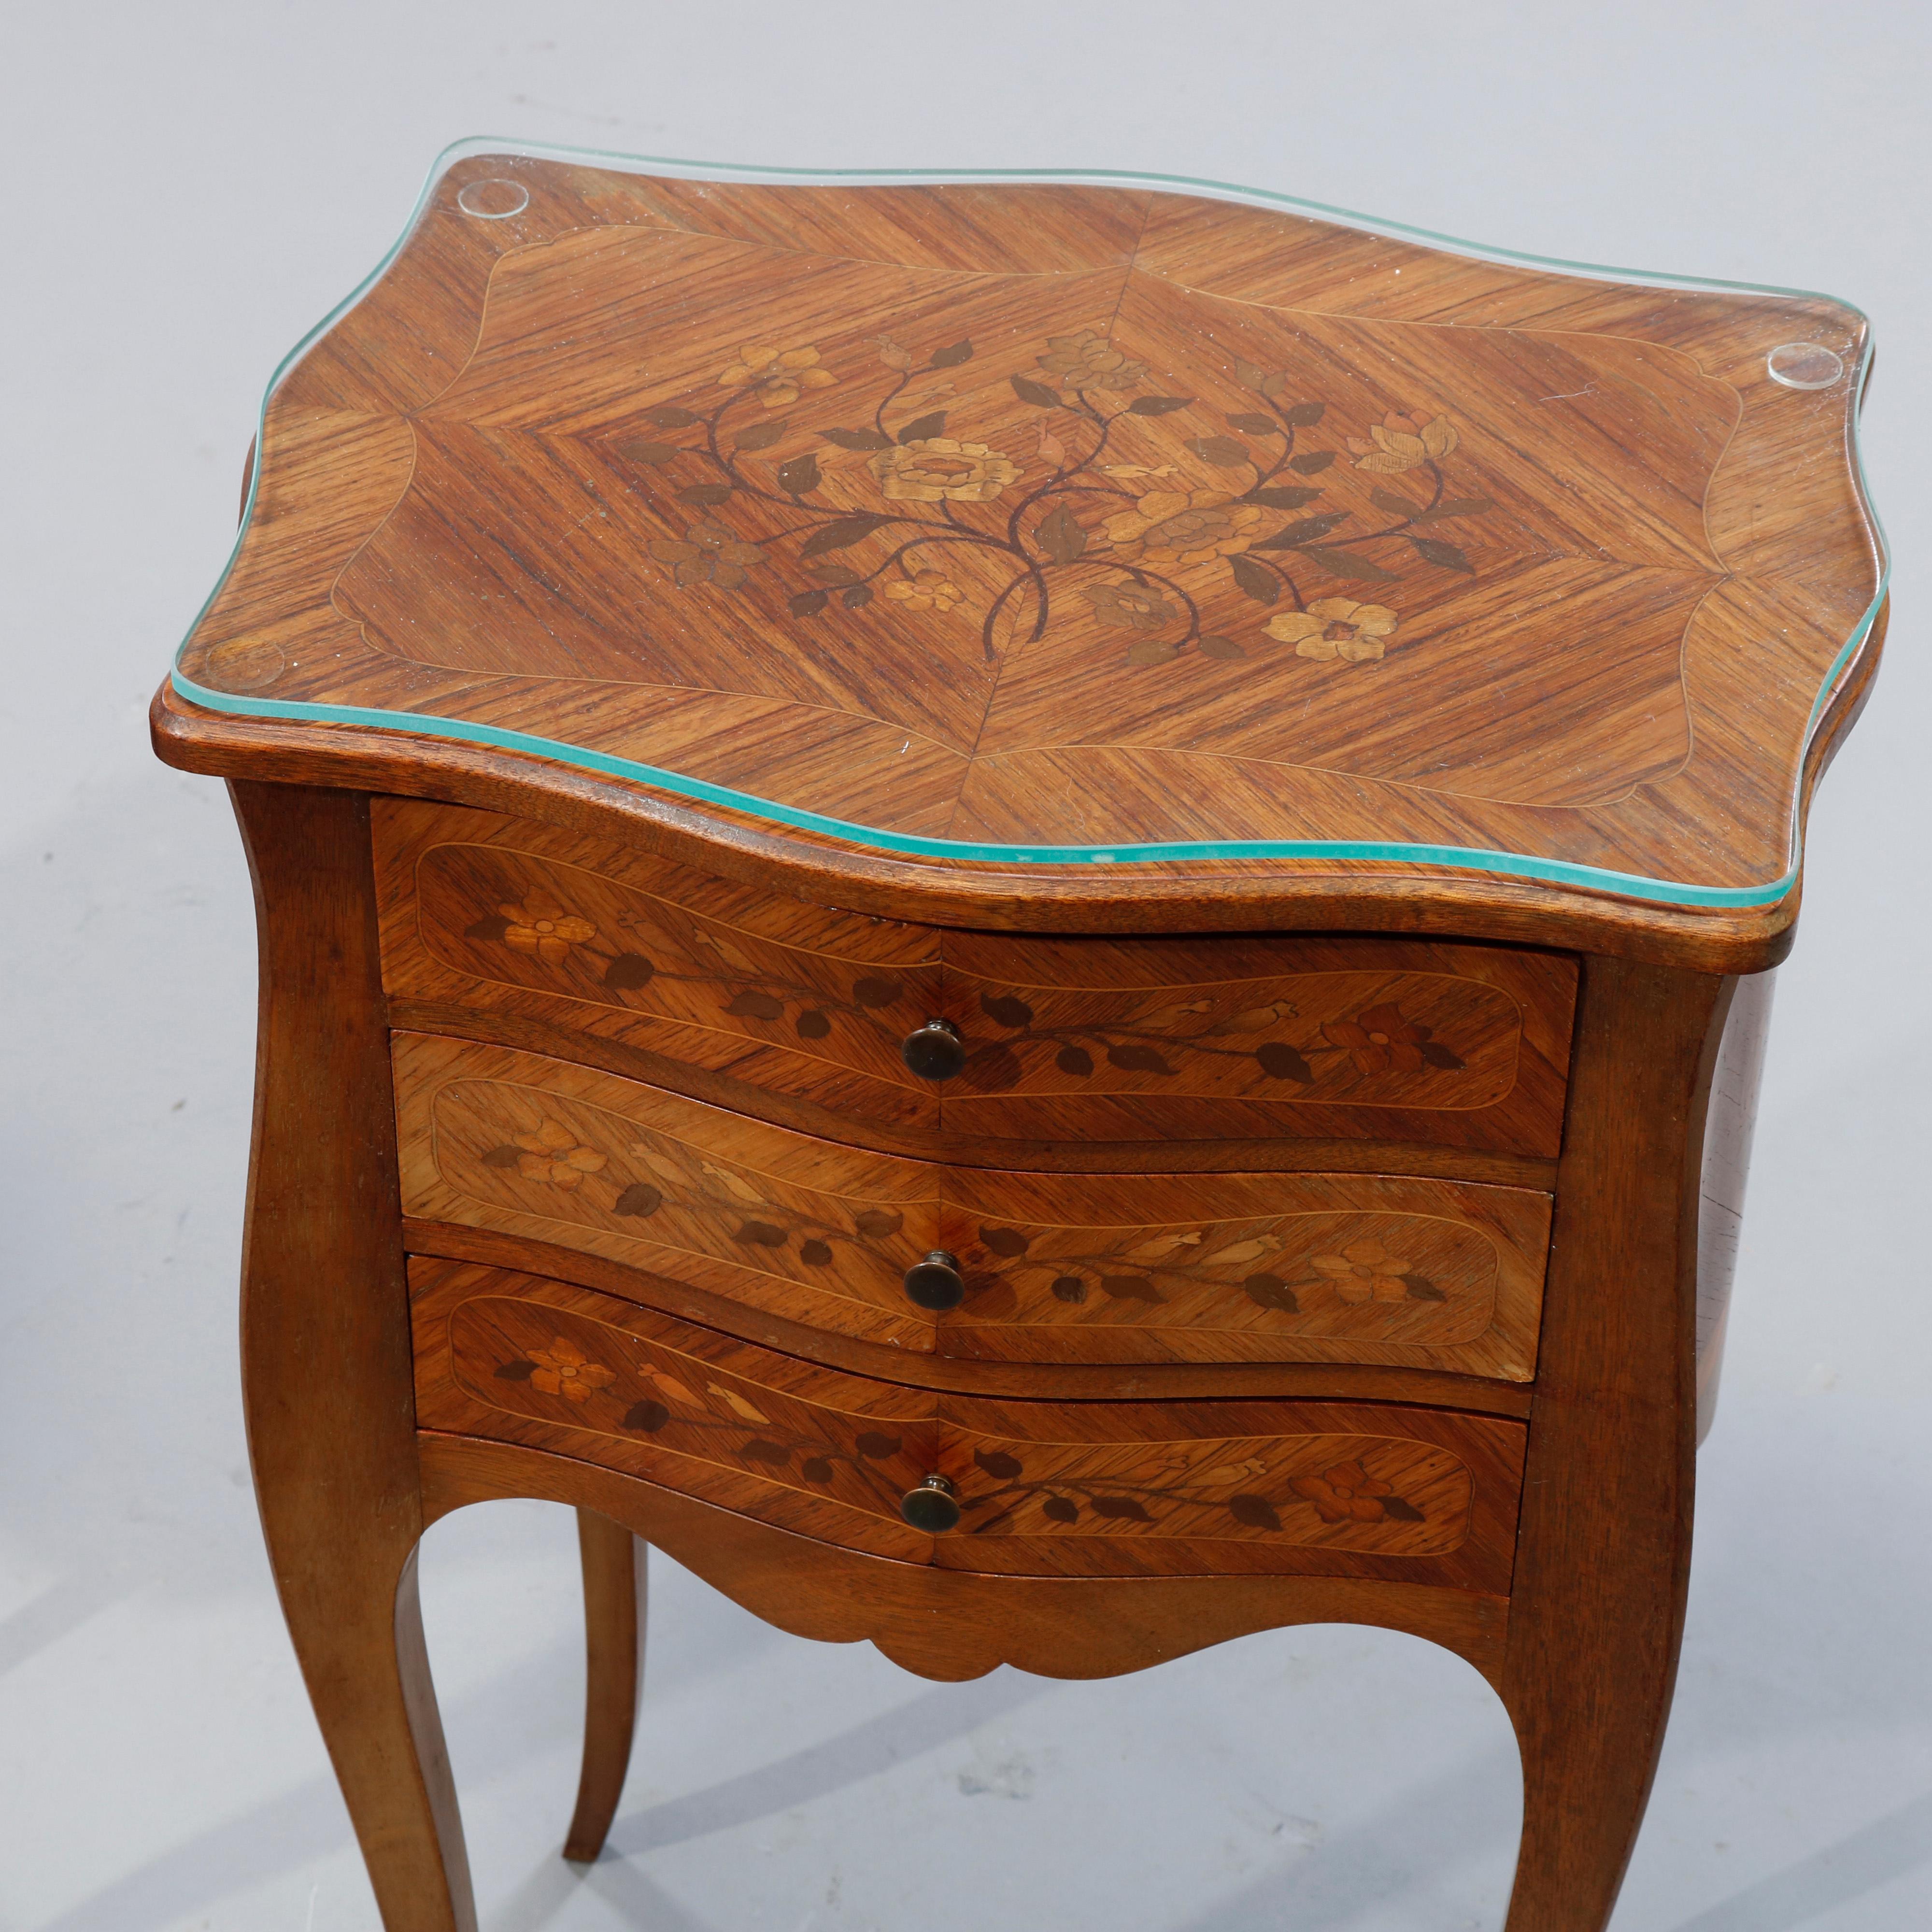 An vintage pair of French side stands offer mahogany construction in serpentine form with bookmatched facing and inlaid satinwood floral marquetry having shaped tops over three drawer case raised on tapered cabriole legs, c1930.

Measures: 22.25